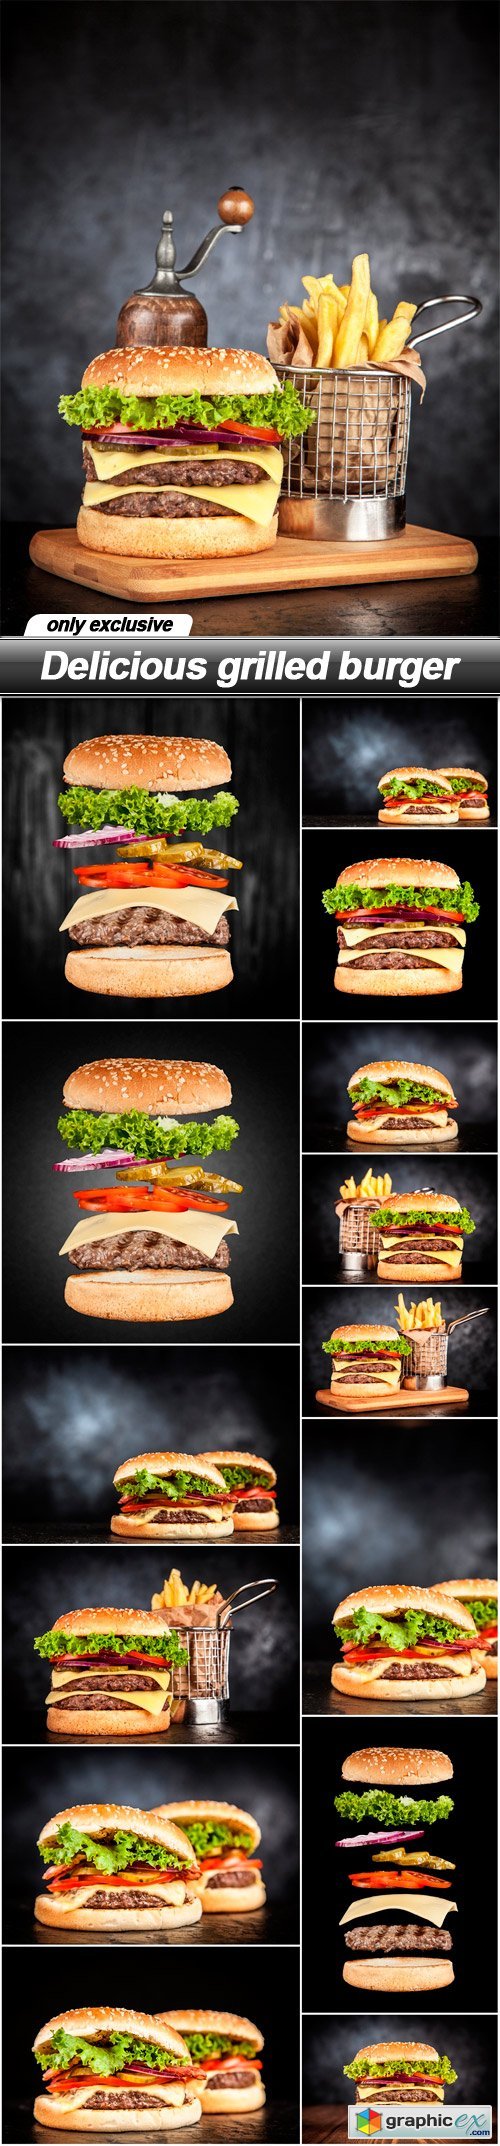 Delicious grilled burger - 15 UHQ JPEG